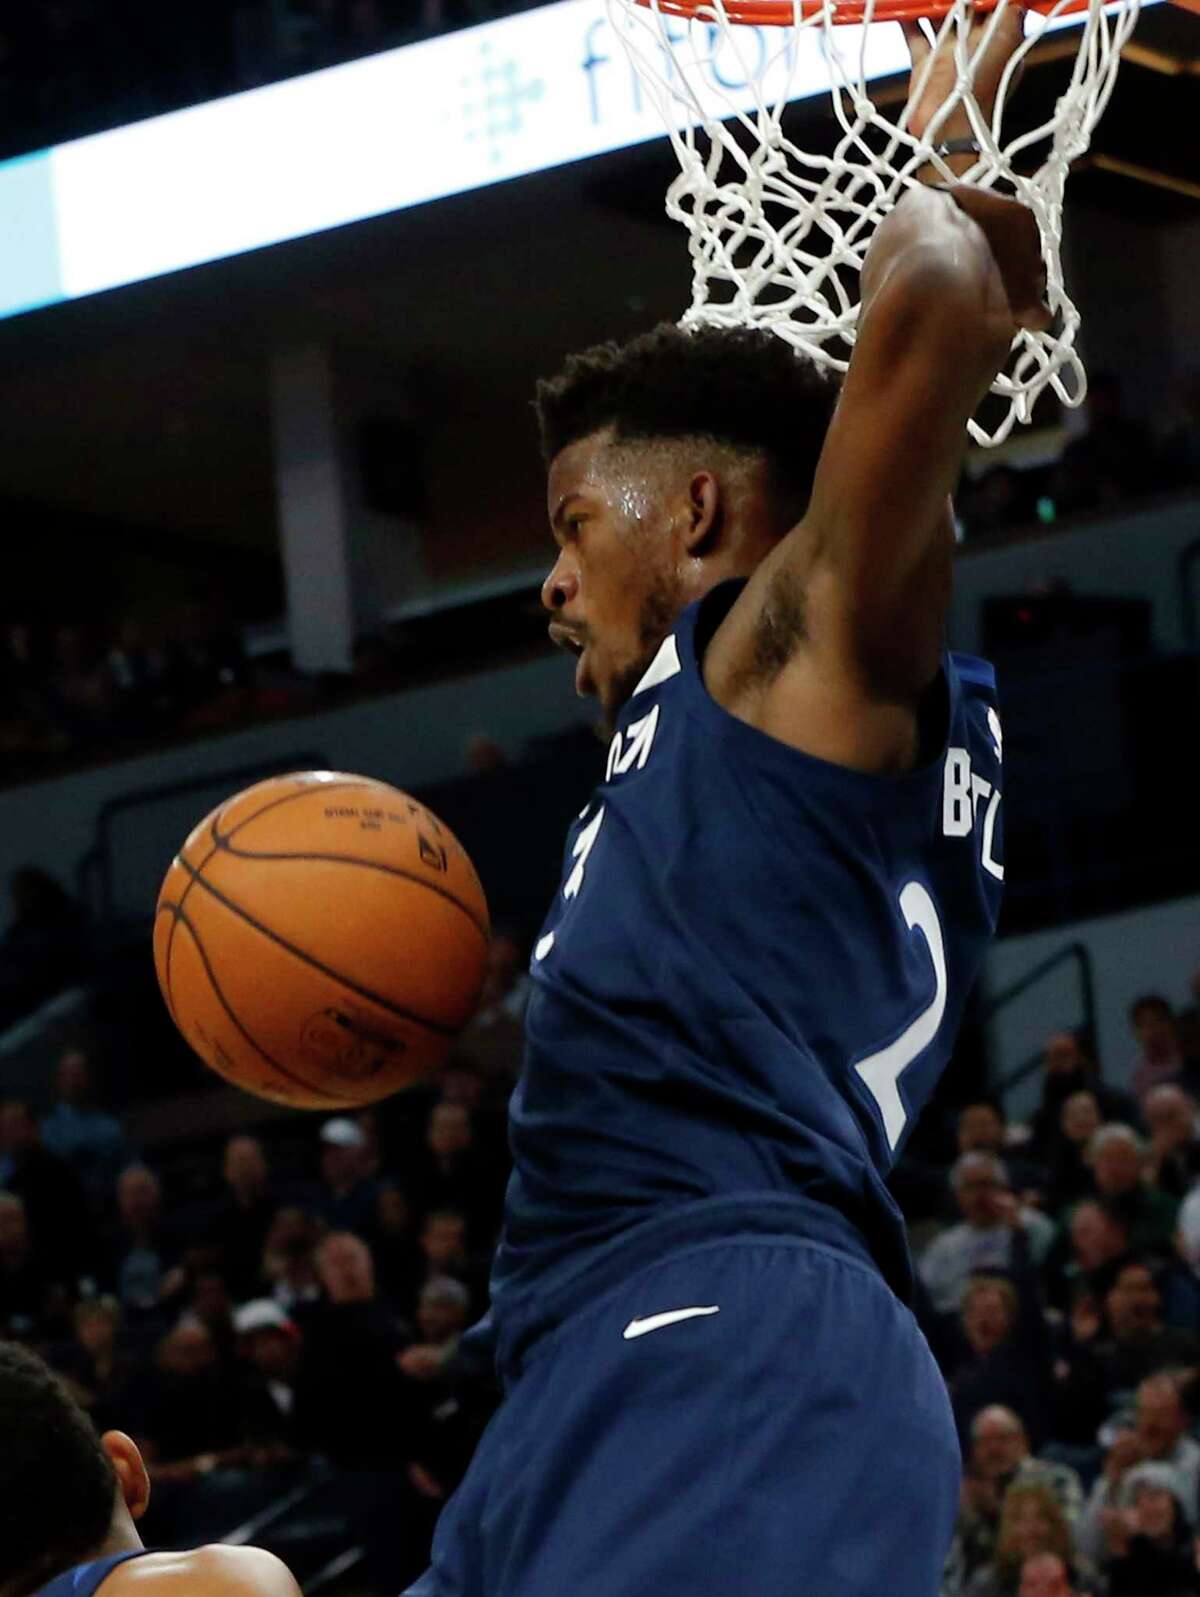 Minnesota Timberwolves' Jimmy Butler dunks against the Oklahoma City Thunder during the first half of an NBA basketball game Friday, Oct. 27, 2017, in Minneapolis. (AP Photo/Jim Mone) ORG XMIT: MNJM106